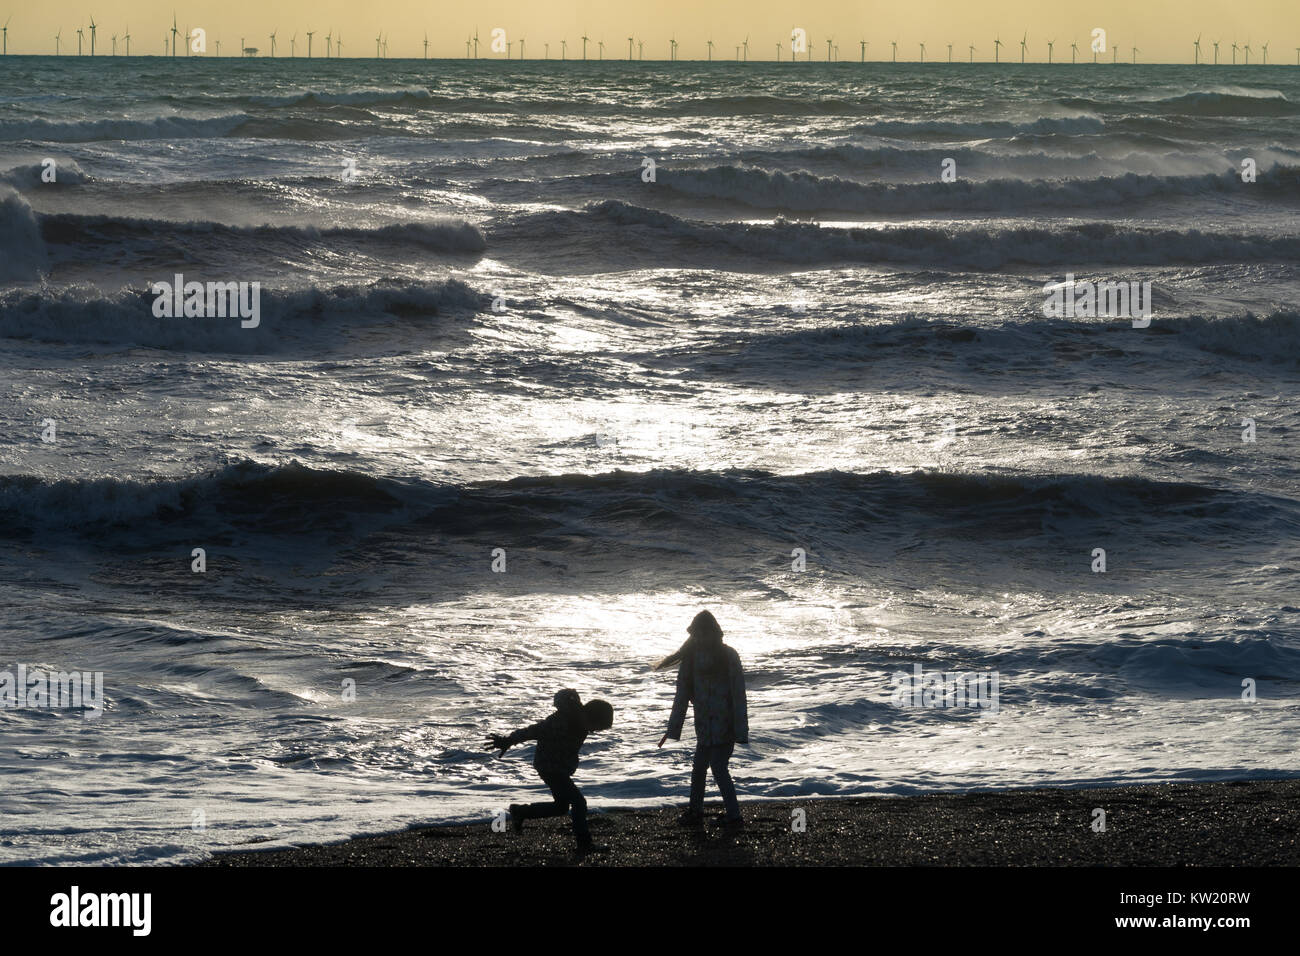 Brighton, UK. 29th December, 2017. A view of wind turbines of the new Rampion windfarm seen from Brighton beach. Photo date: Friday, December 29, 2017. Photo: Roger Garfield/Alamy Live News Stock Photo